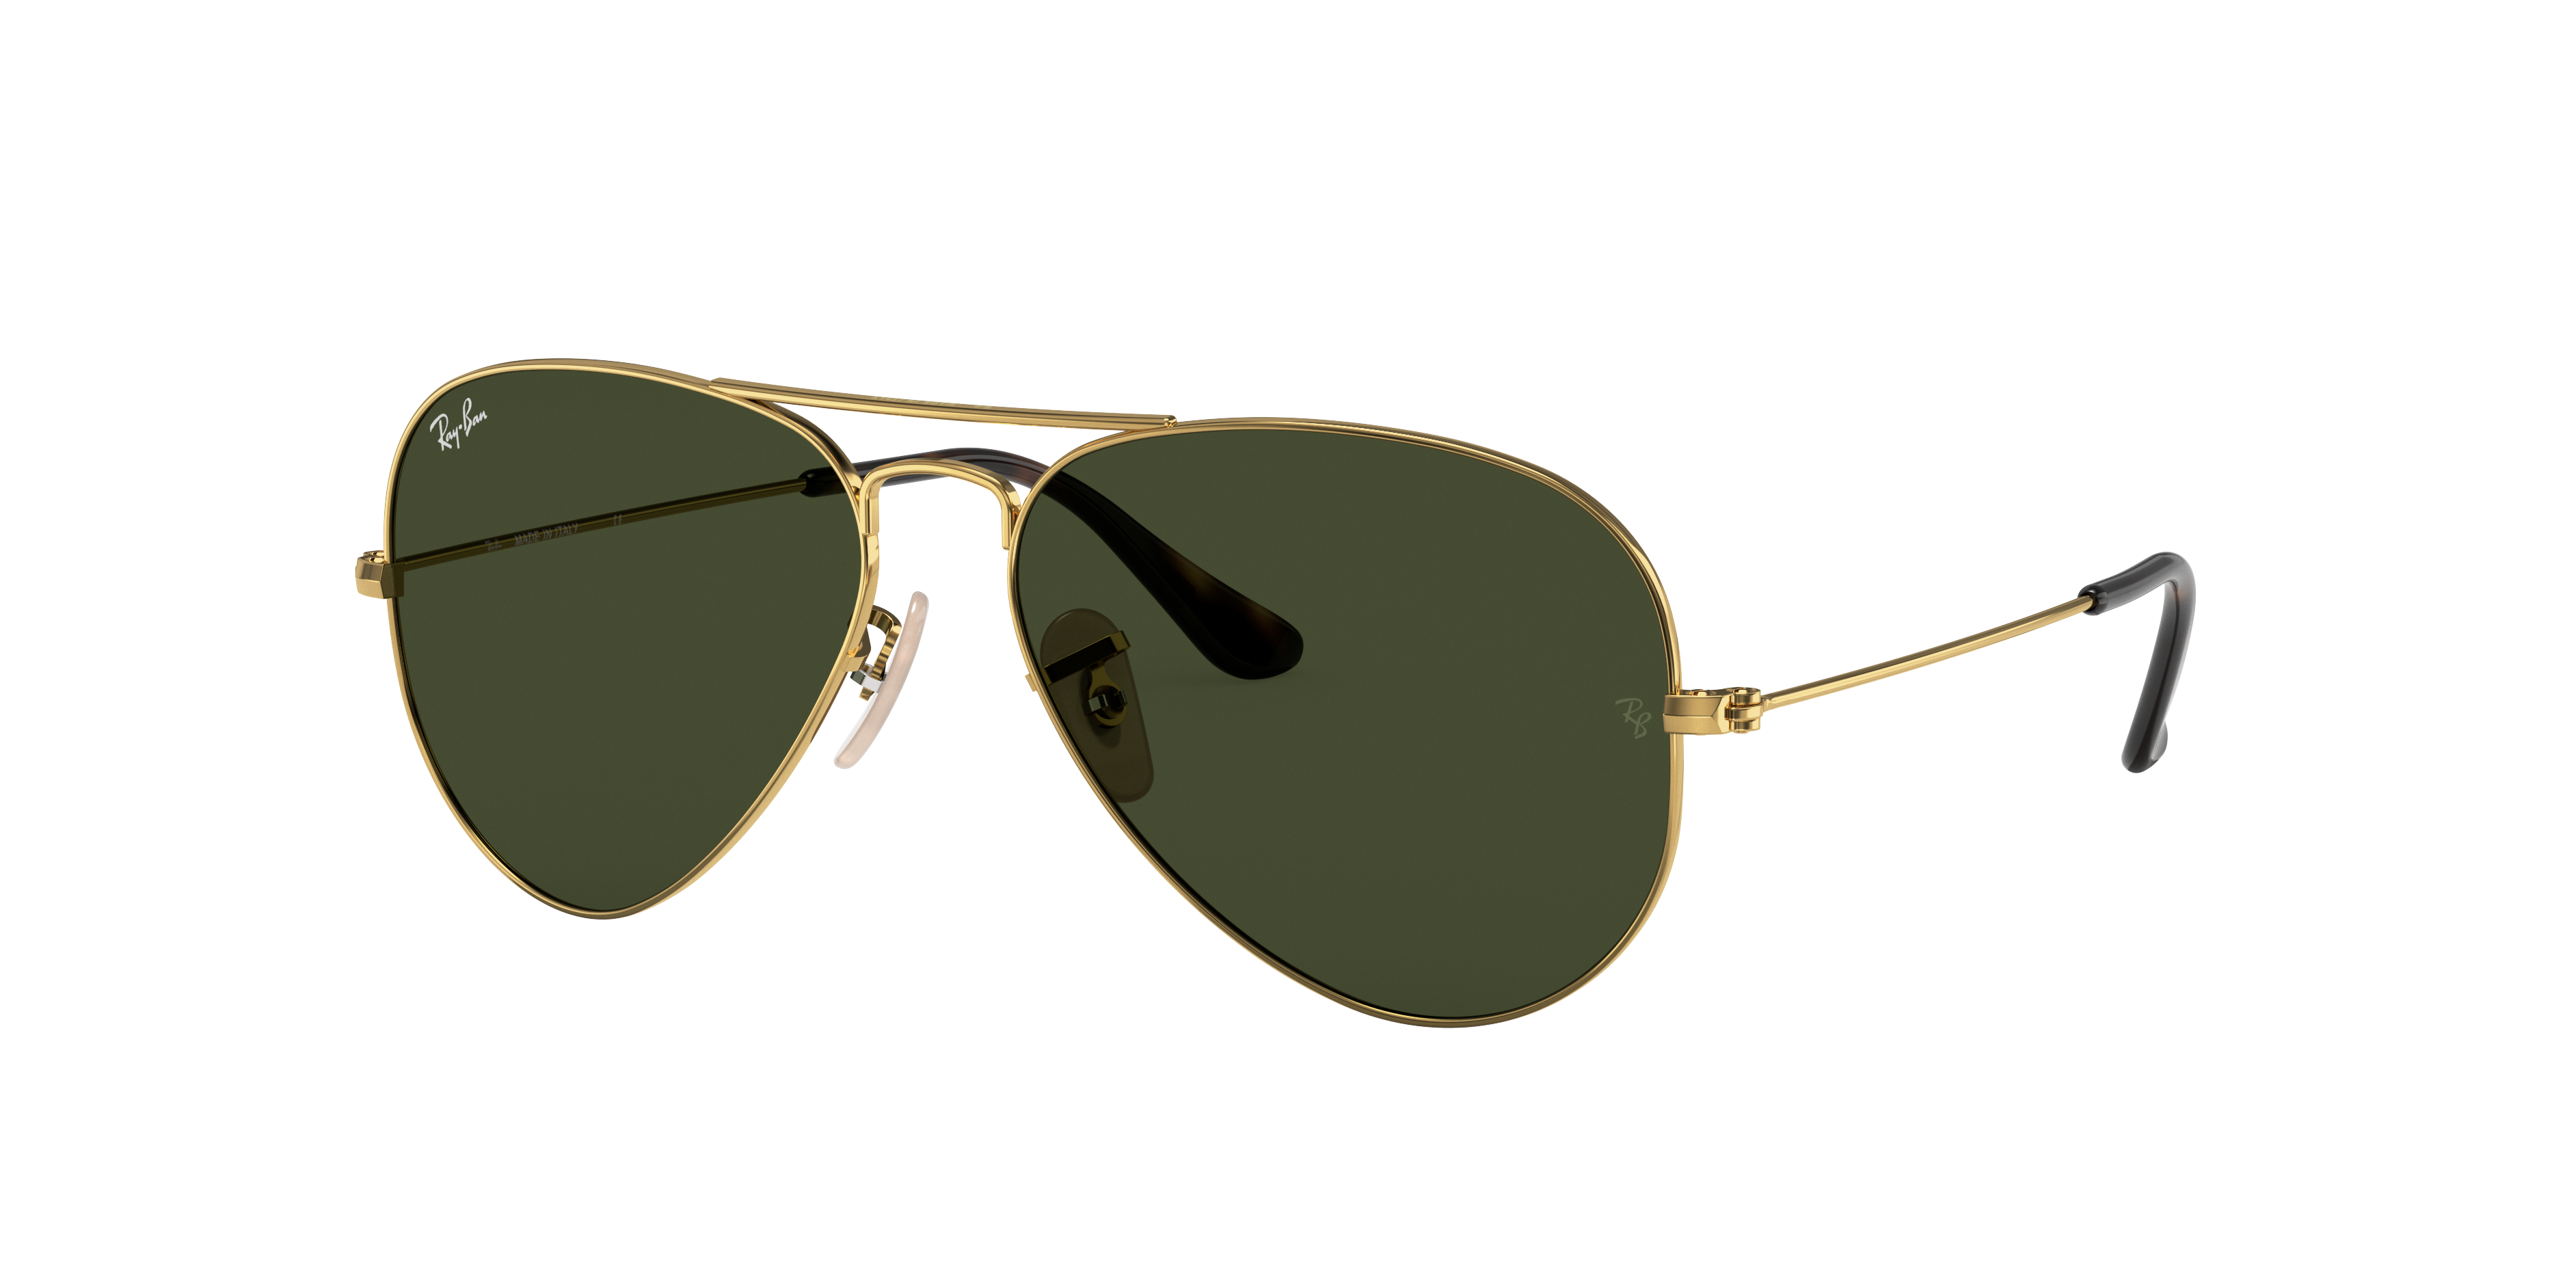 Ray-Ban 0RB3025 Sunglasses in Gold 